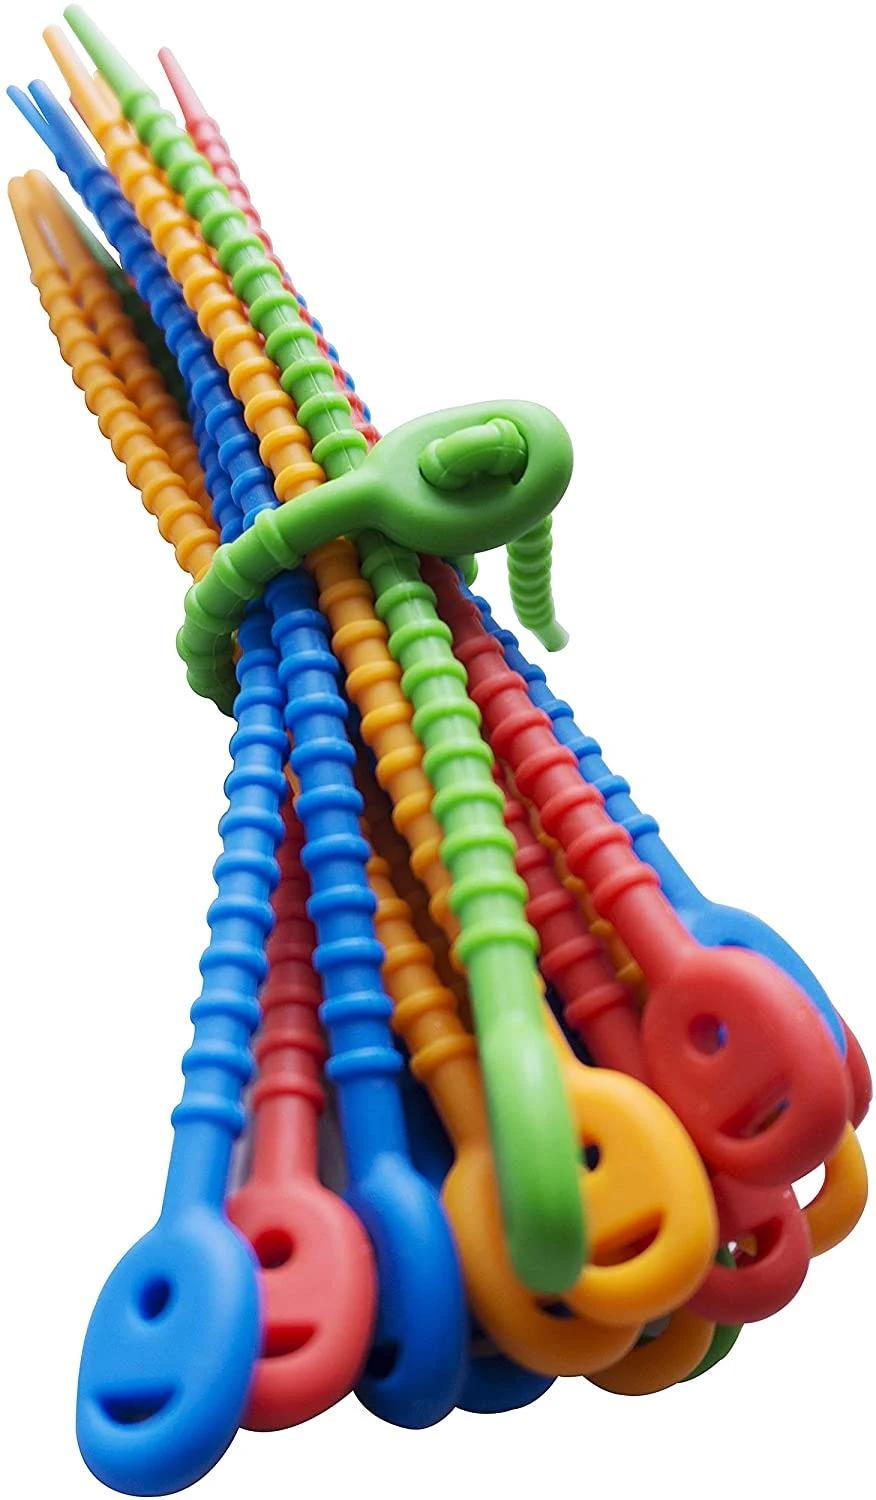 Colorful Silicone Twist Tieties Bag Clip Cable Straps Bread Tie Household Snake Ties